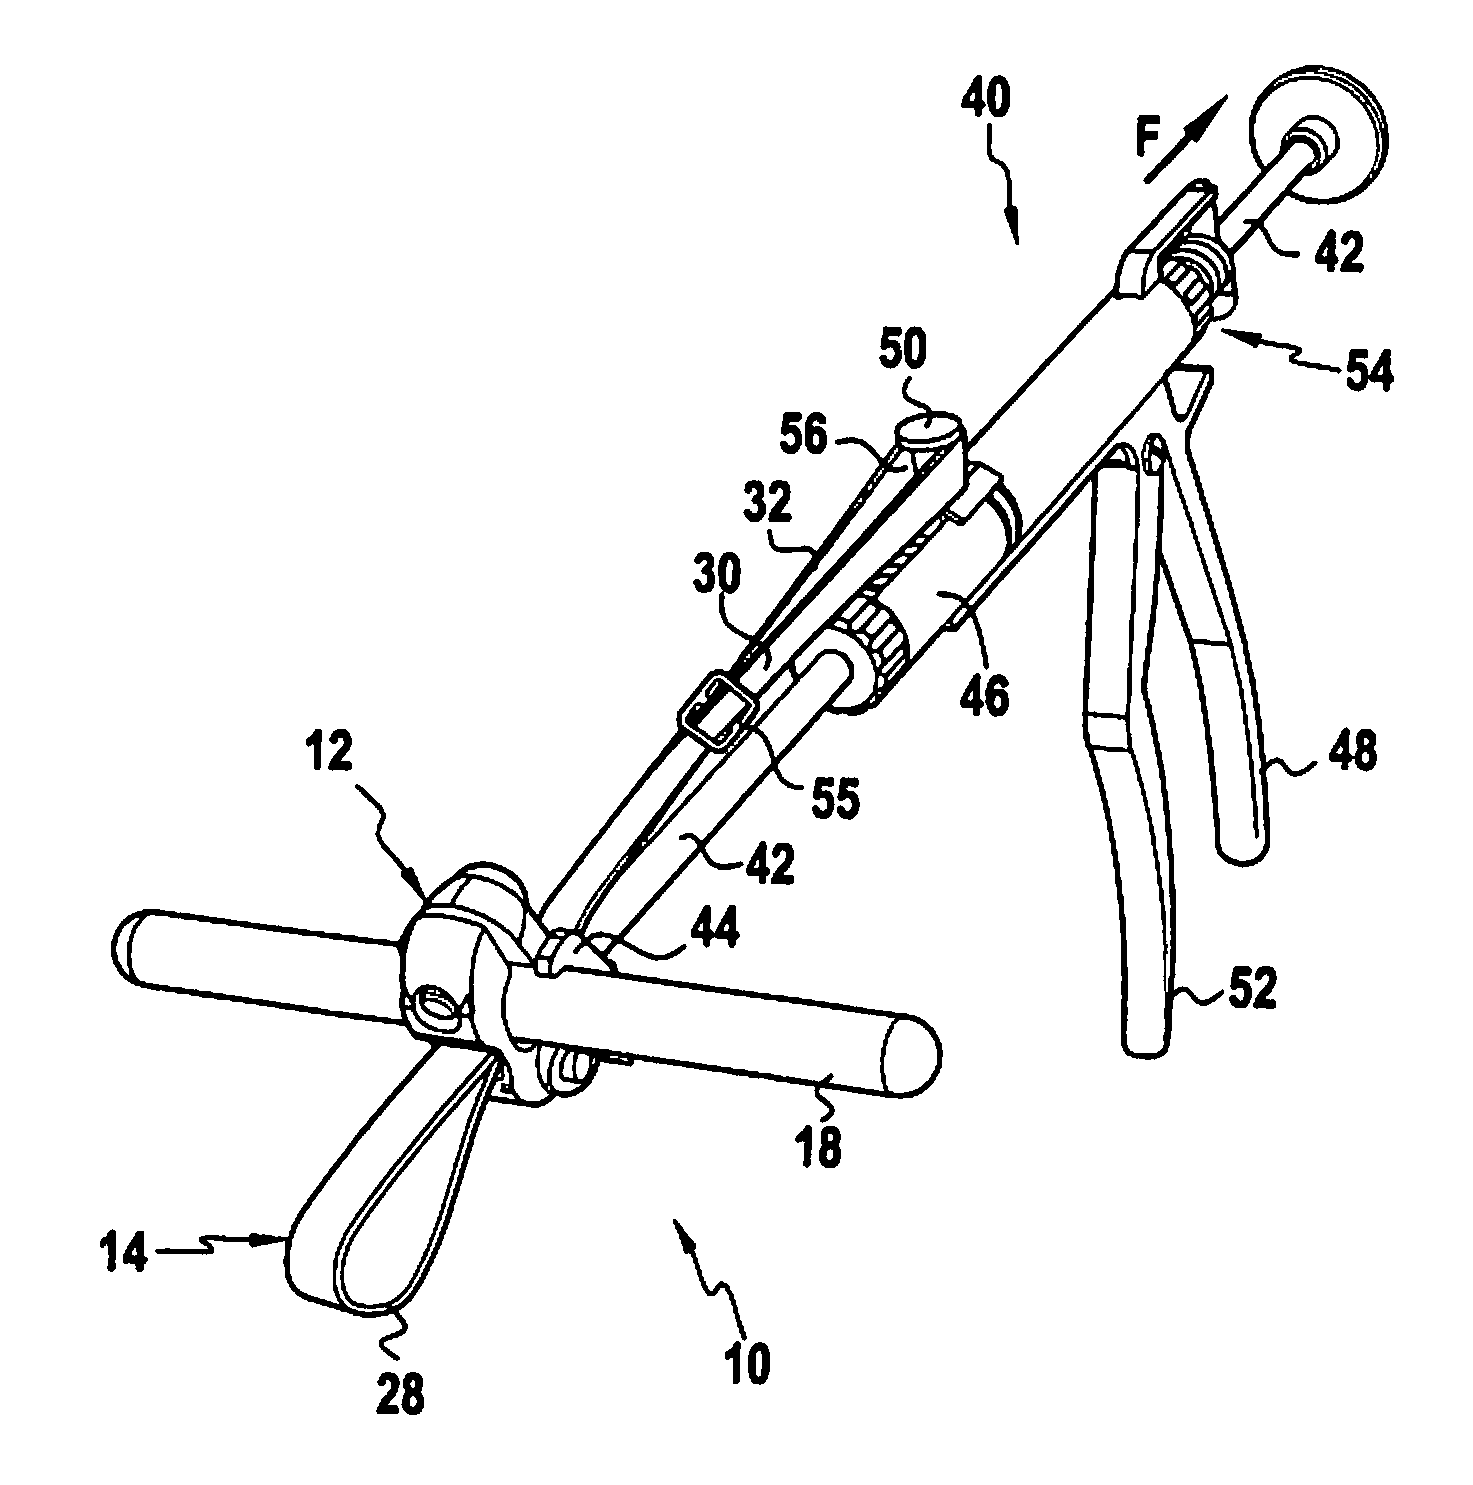 Instrument for tensioning a flexible tie